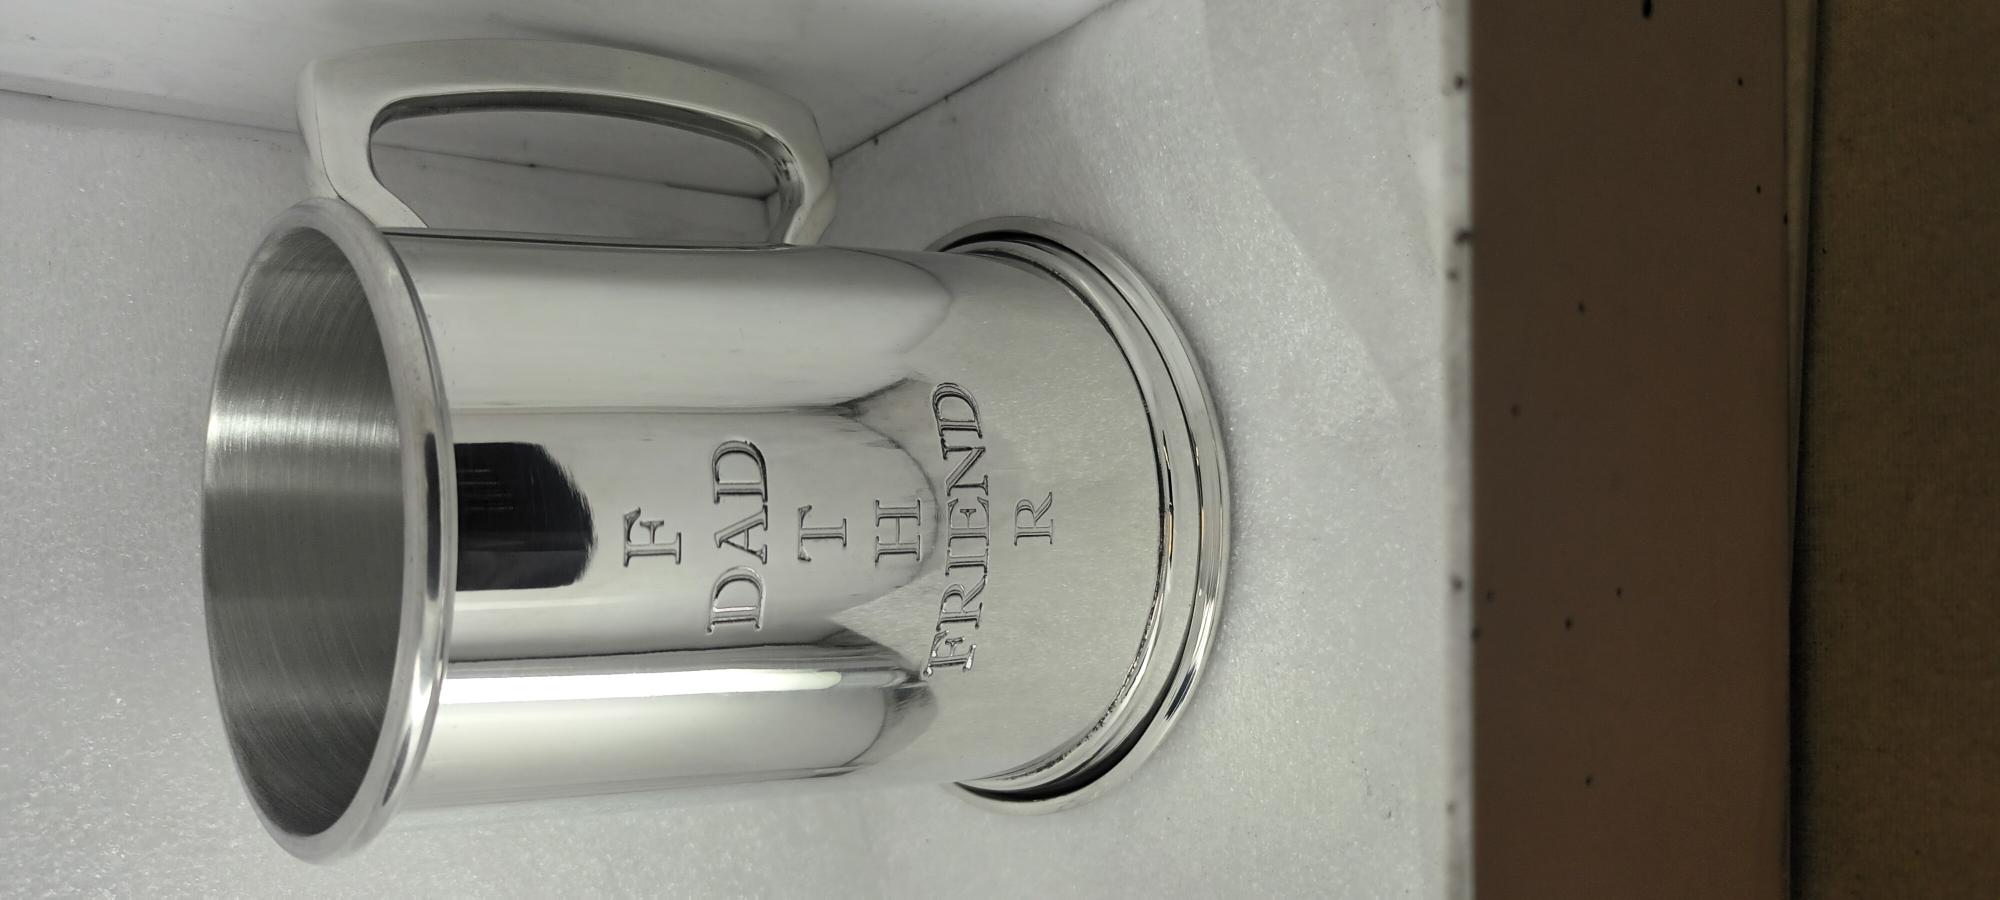 1 Pint Engraved "Father, Dad, Friend" Pewter Tankard (T019)